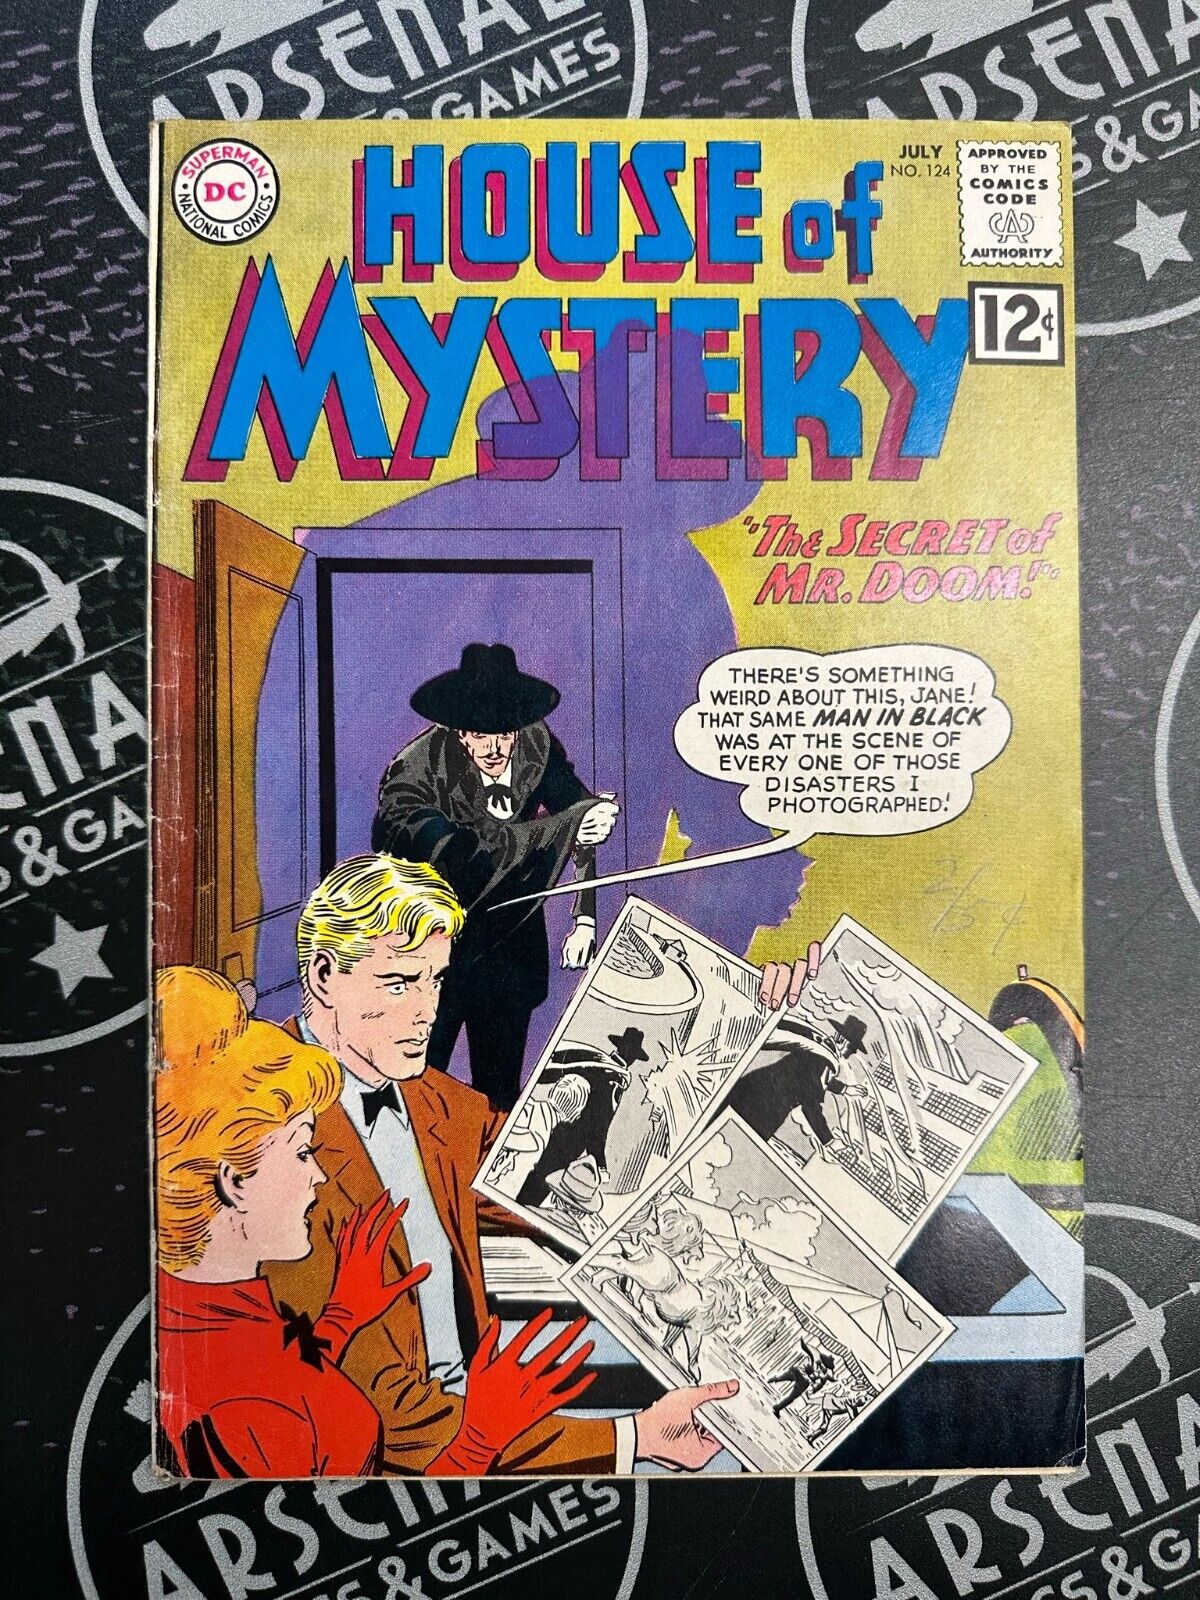 House of Mystery #124 1962 FN 6.0 Silver Age DC Comics "The Secret of Mr. Doom!"